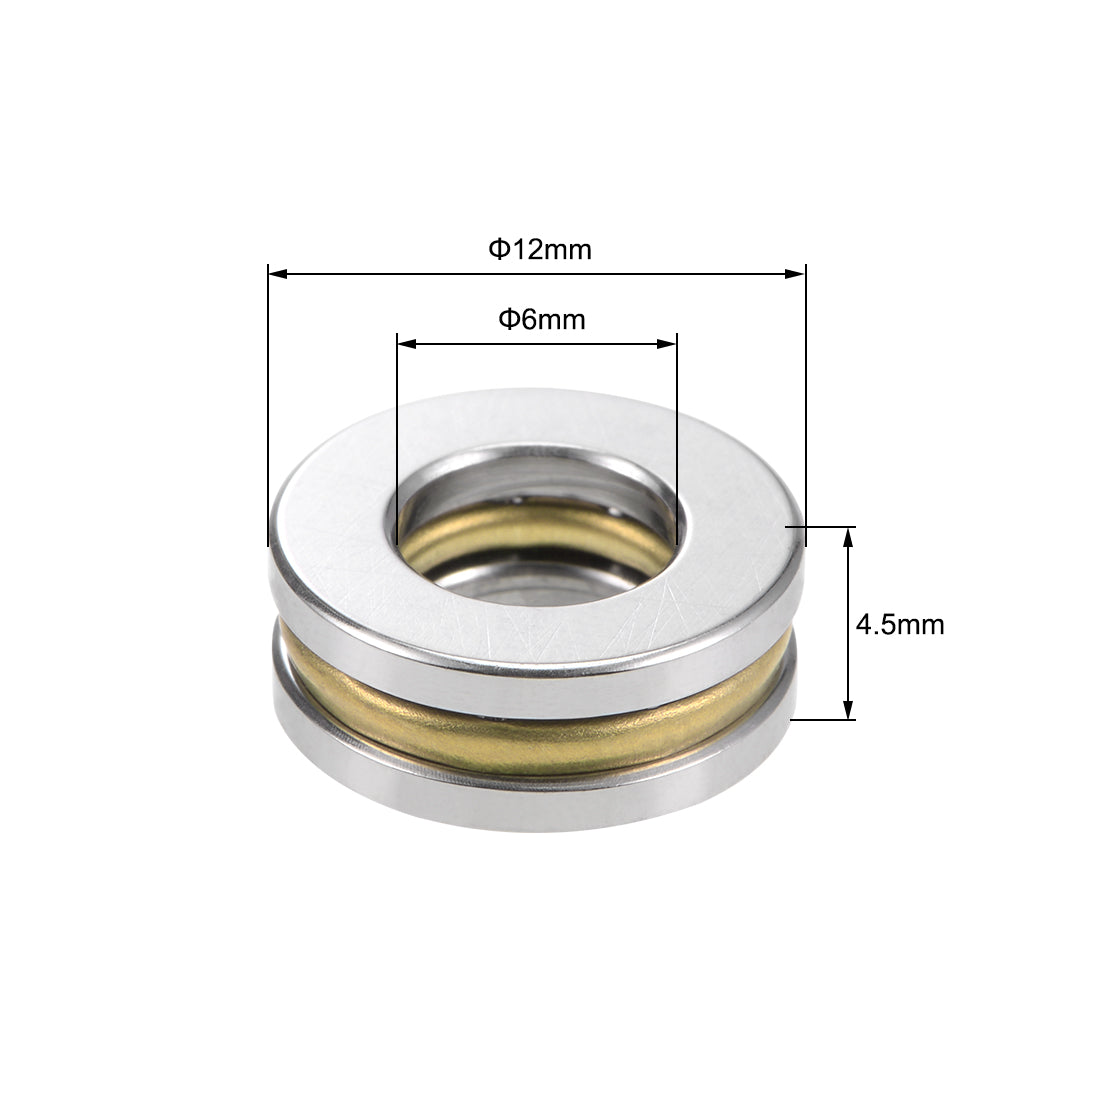 uxcell Uxcell F6-12M Miniature Thrust Ball Bearing 6x12x4.5mm Chrome Steel with Washer 5Pcs